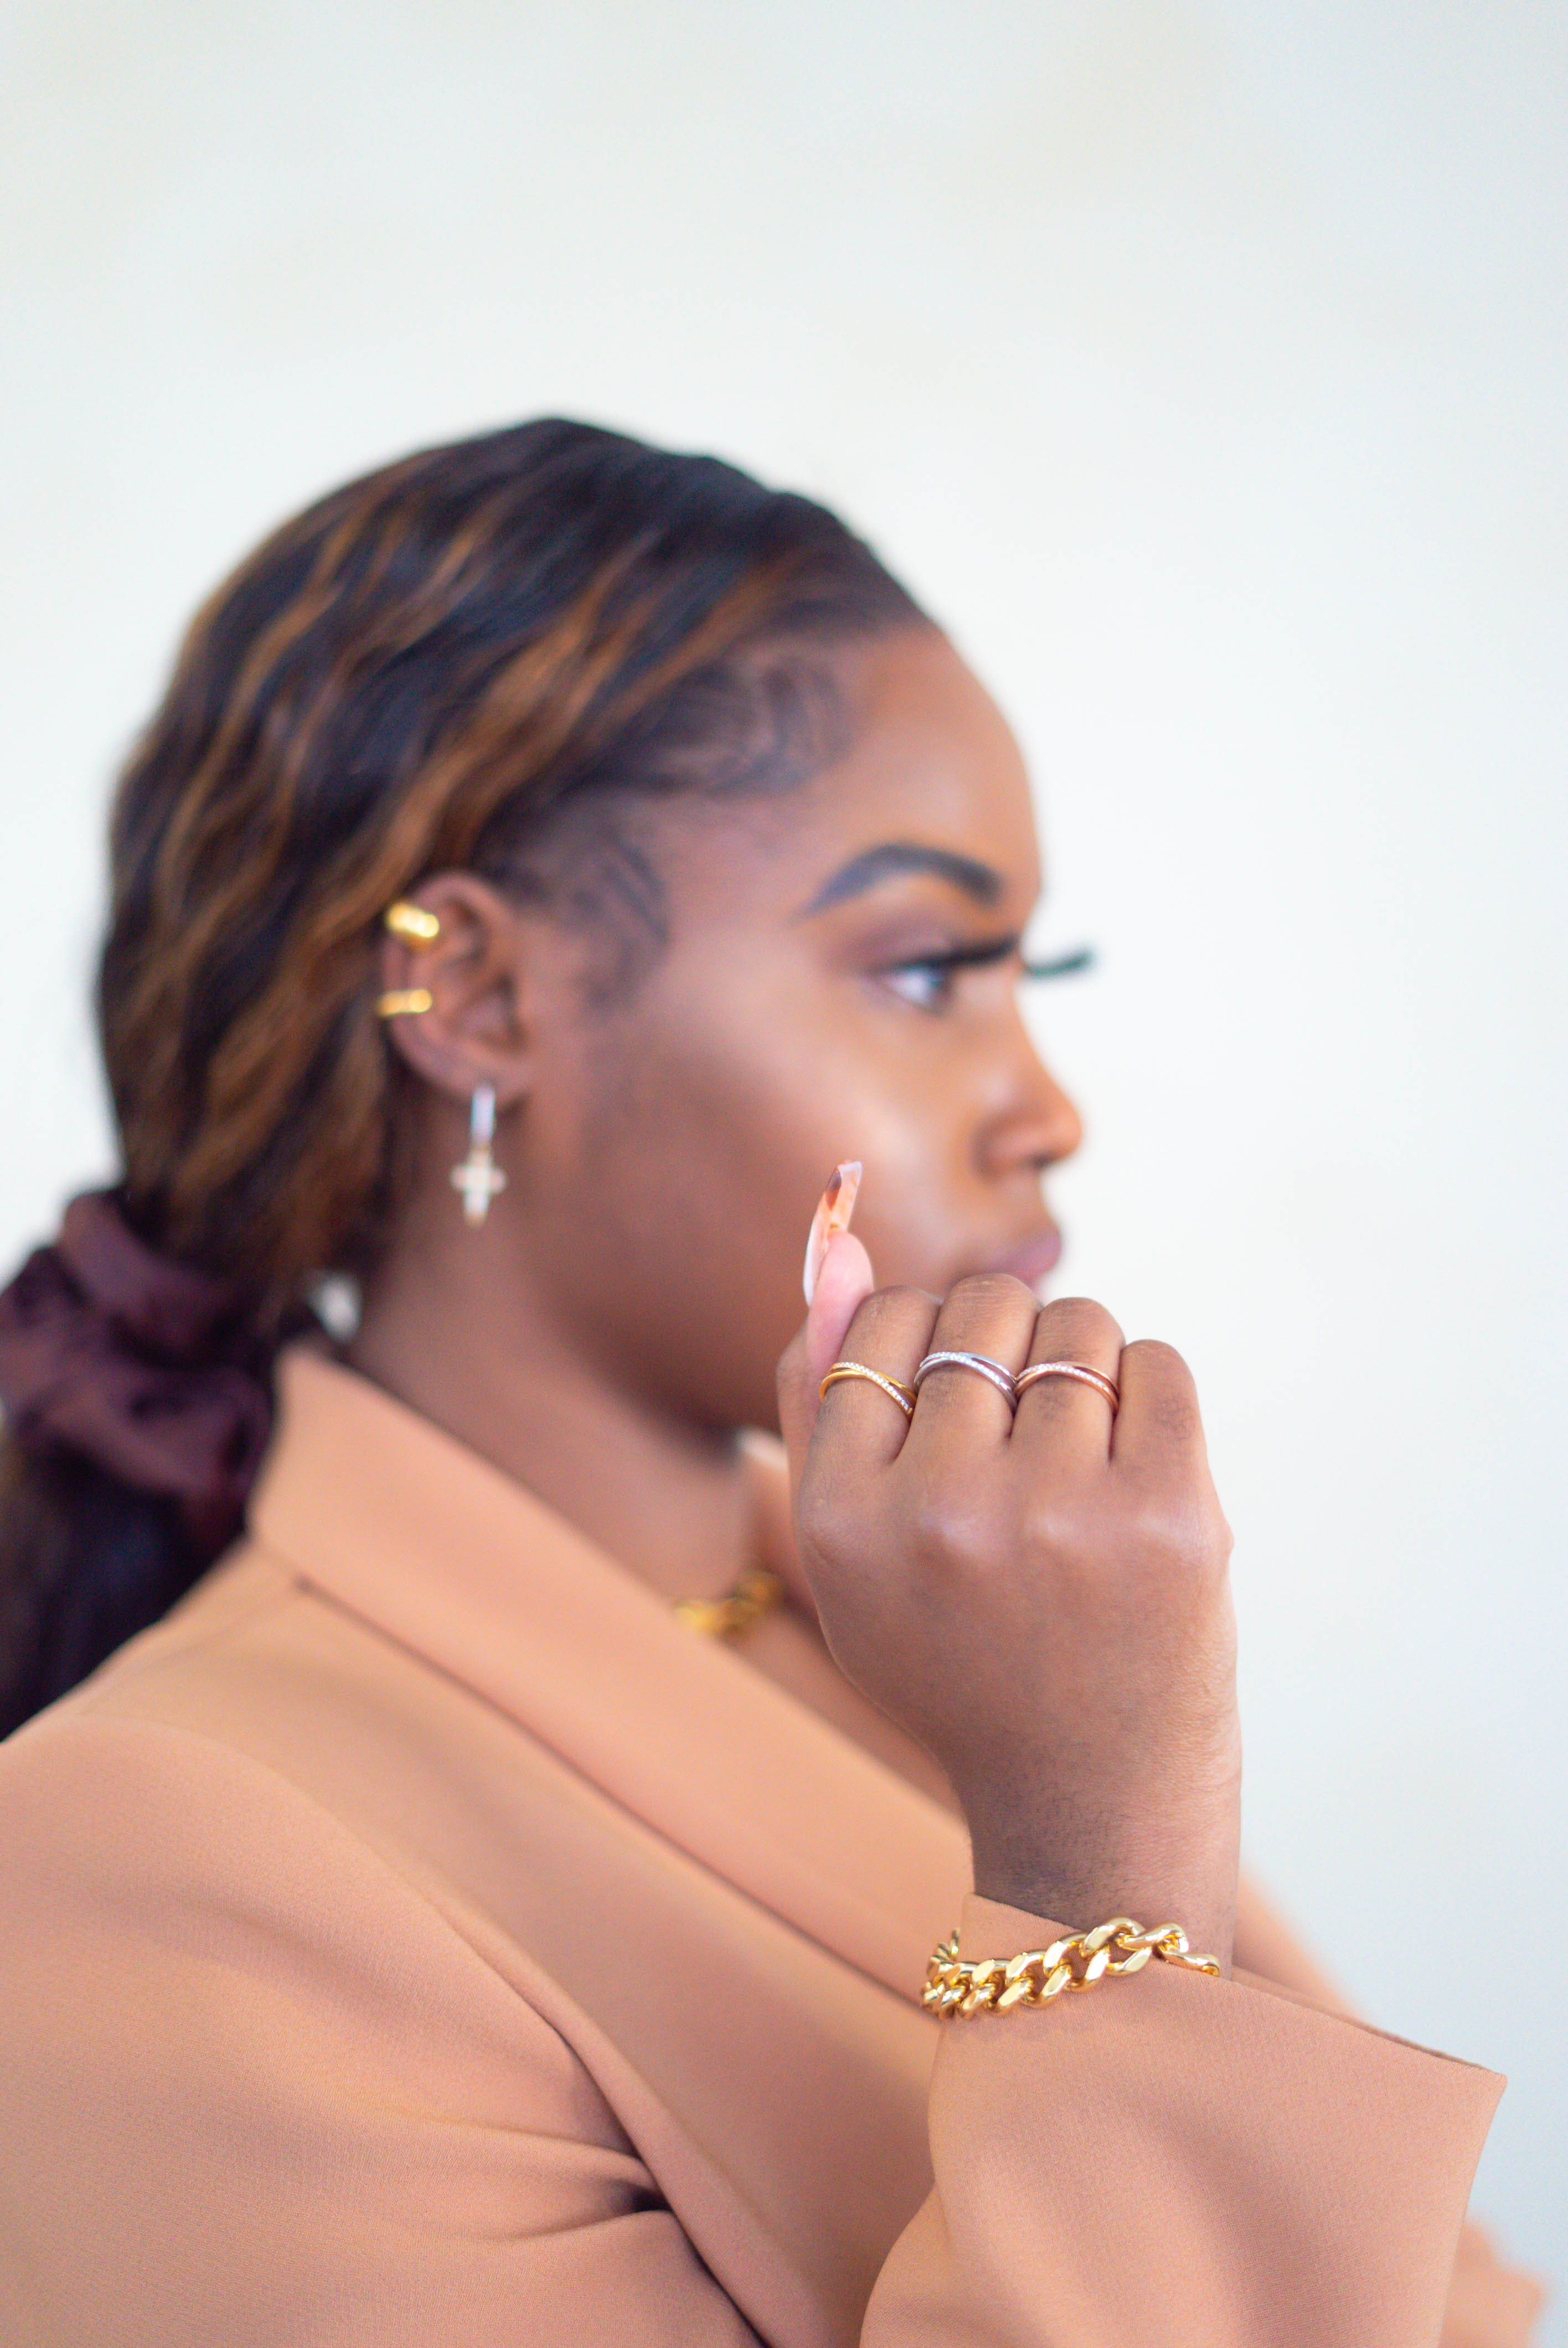 Woman in a light brown suit wearing Criss Cross Cubic Zirconia Ring by E's Element. She is also wearing an 18k gold stainless steel chain bracelet and earrings.